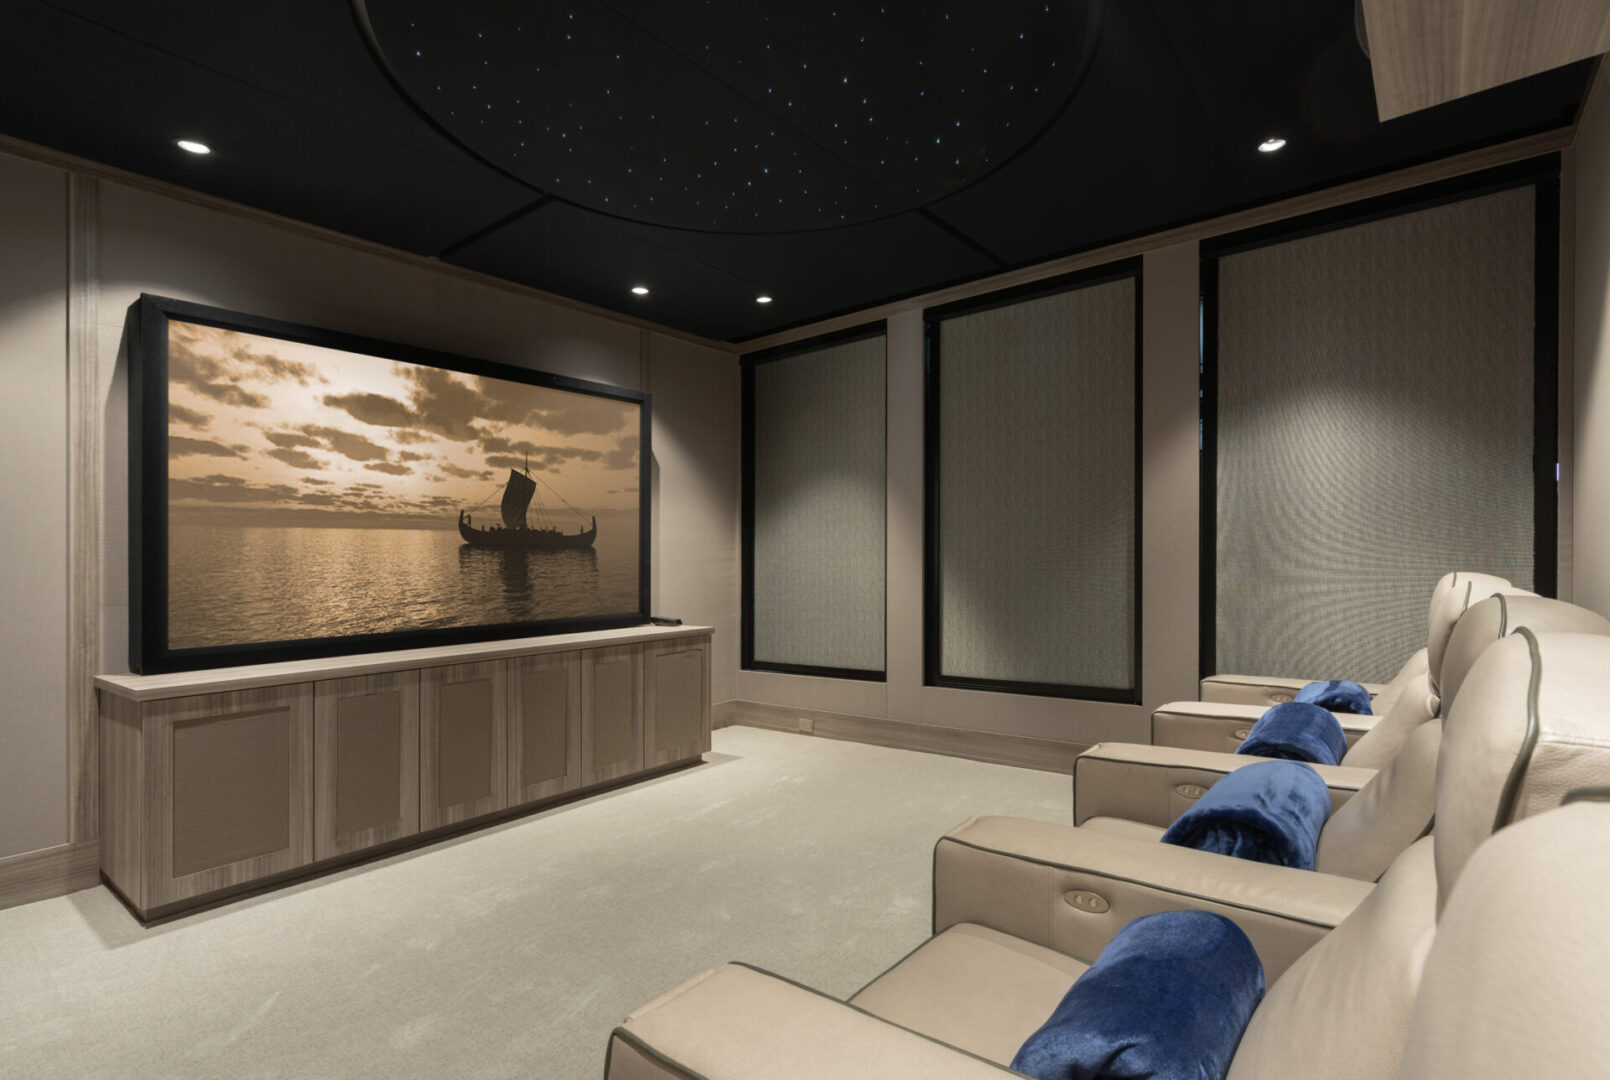 A media room with a big TV and cream-colored reclining chairs